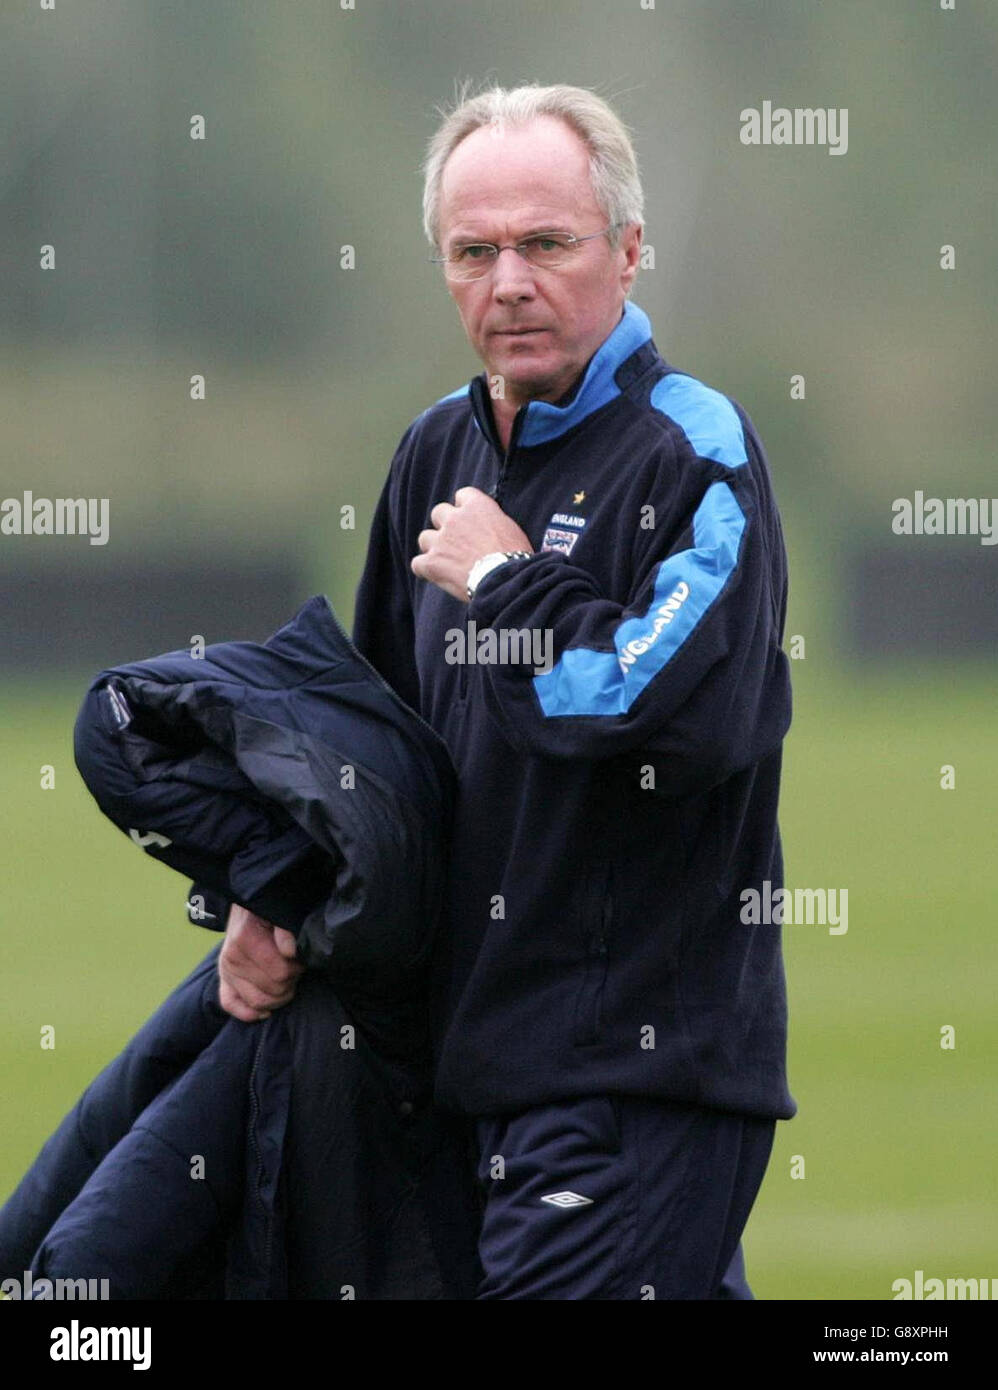 England manager Sven-Goran Eriksson overlooks his players during a training session at Carrington Training Ground, Manchester, Tuesday October 4, 2005. England play Austria in their World Cup qualifying match on Saturday. PRESS ASSOCIATION Photo. Photo credit should read: Martin Rickett/PA. Stock Photo